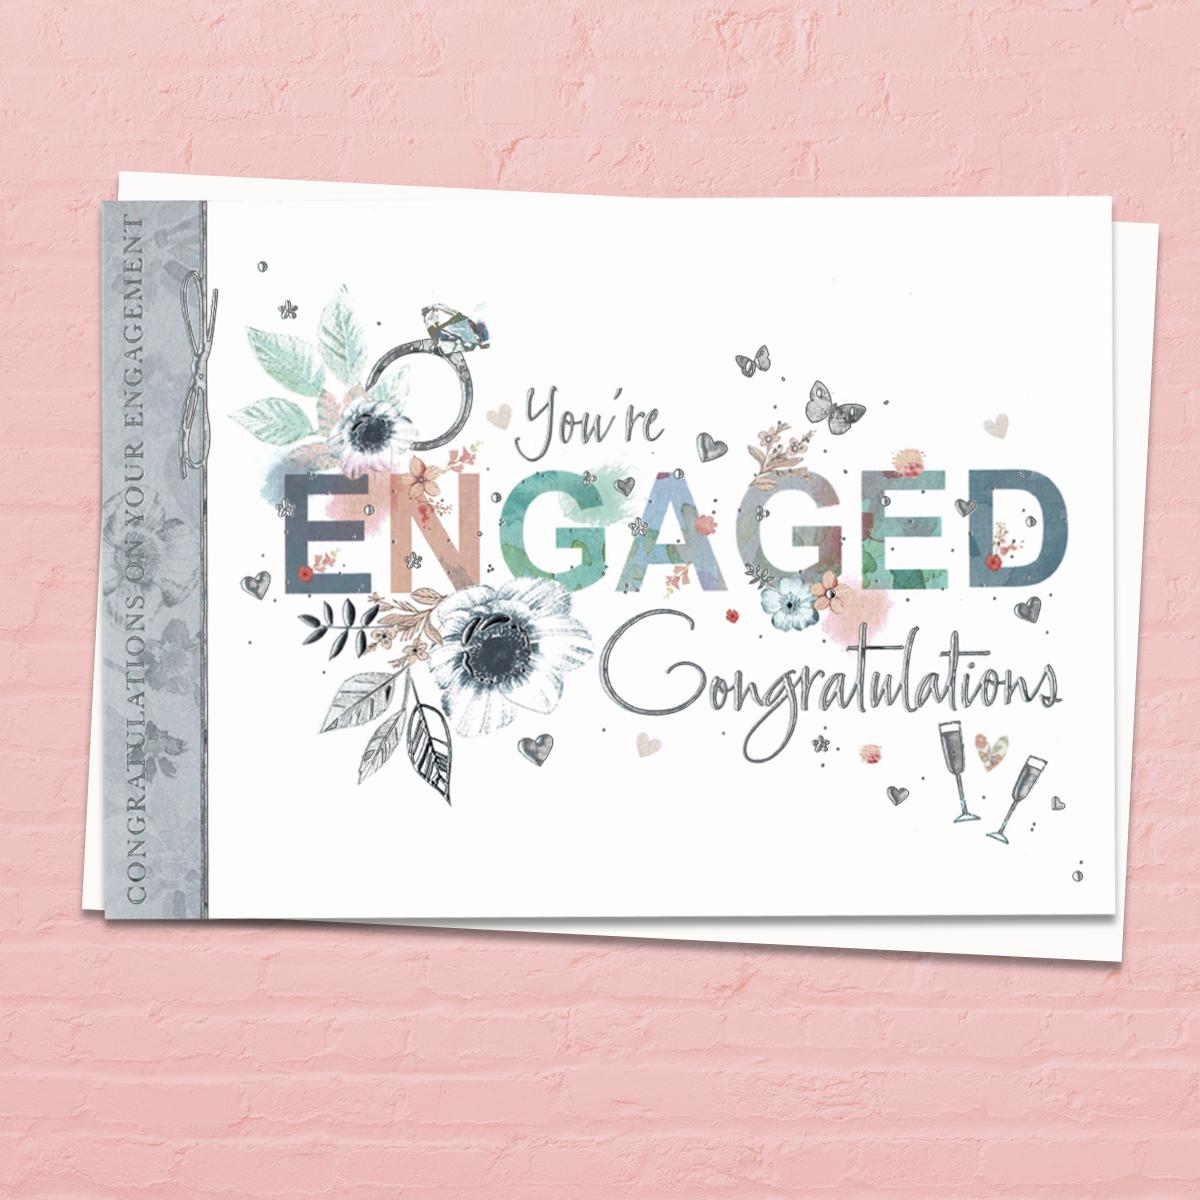 'You're Engaged Congratulations' Card. This 'Landscape' Card Features A Diamond Ring with Beautiful Floral Adorned Letters Of 'Engagement' . With Beautiful Silver Foil Detail And White Envelope